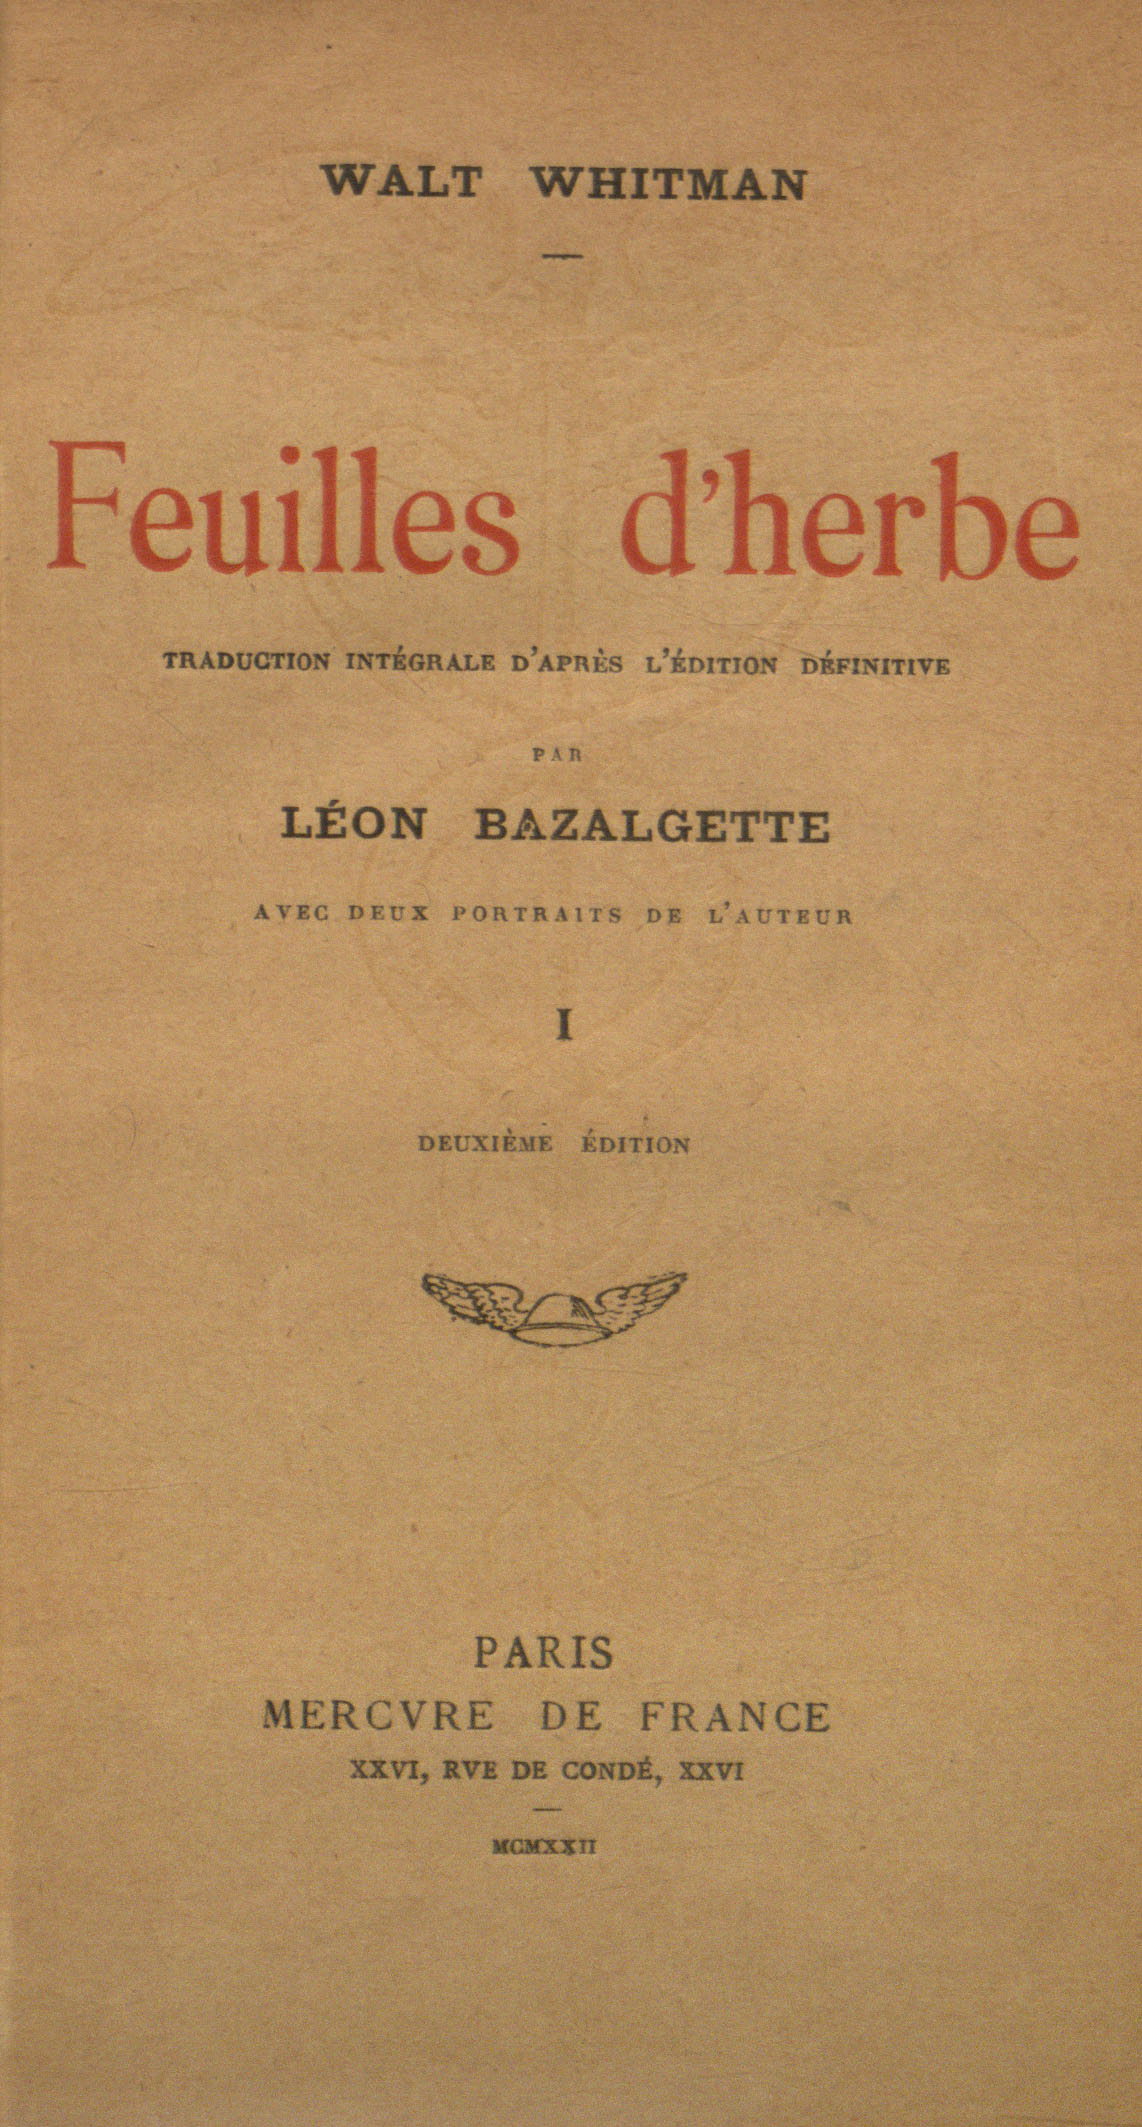 French edition of Leaves of Grass